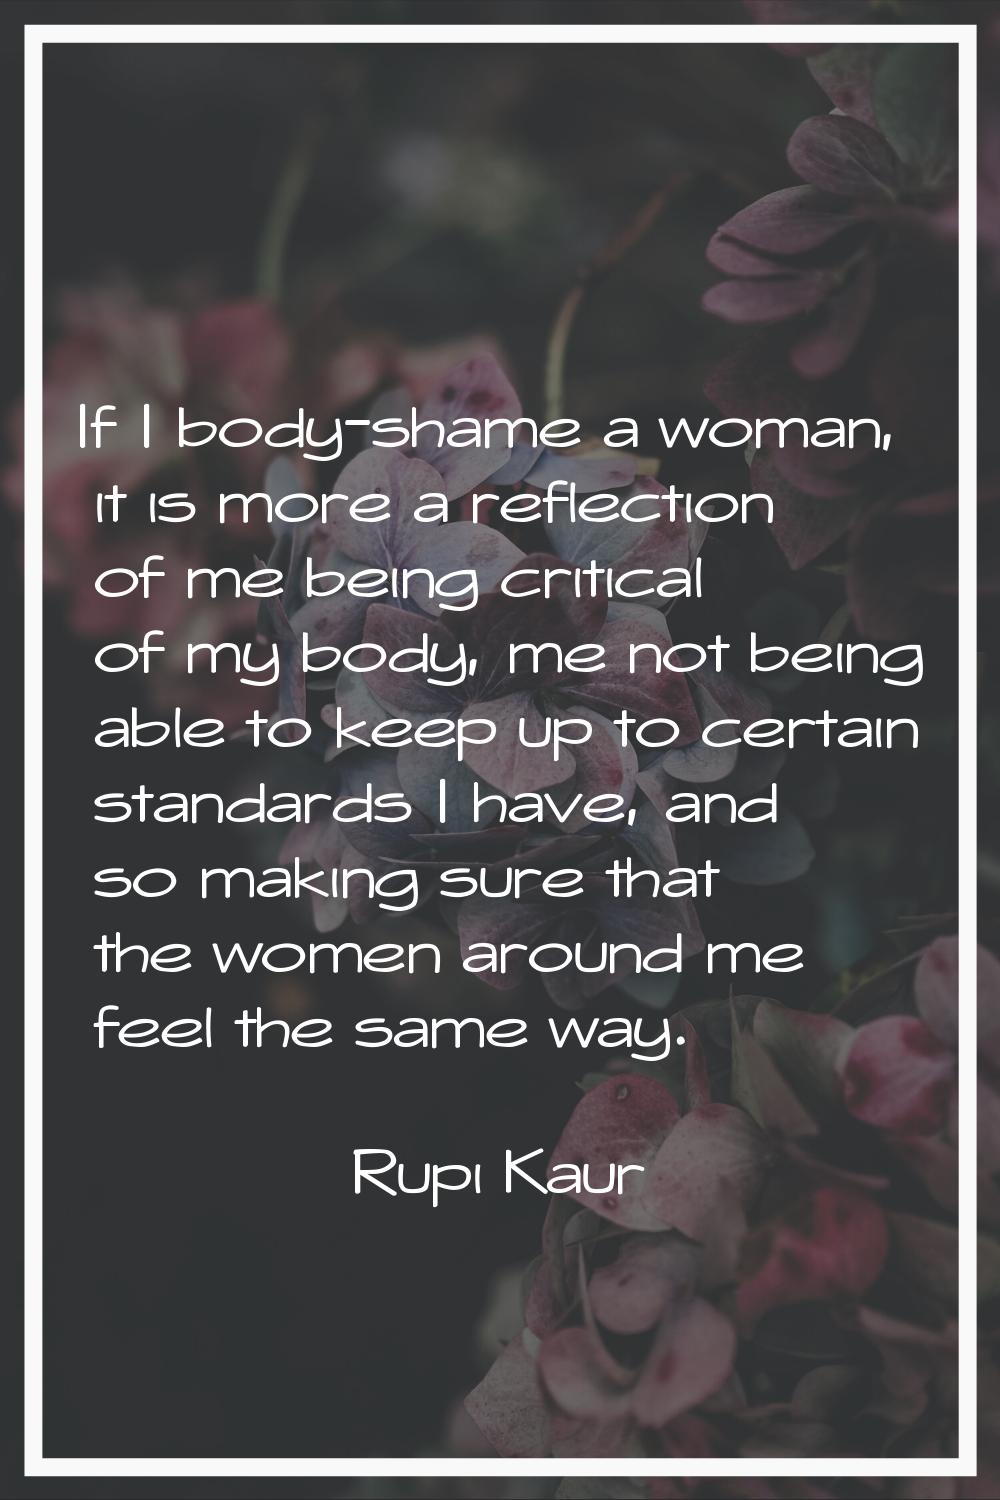 If I body-shame a woman, it is more a reflection of me being critical of my body, me not being able